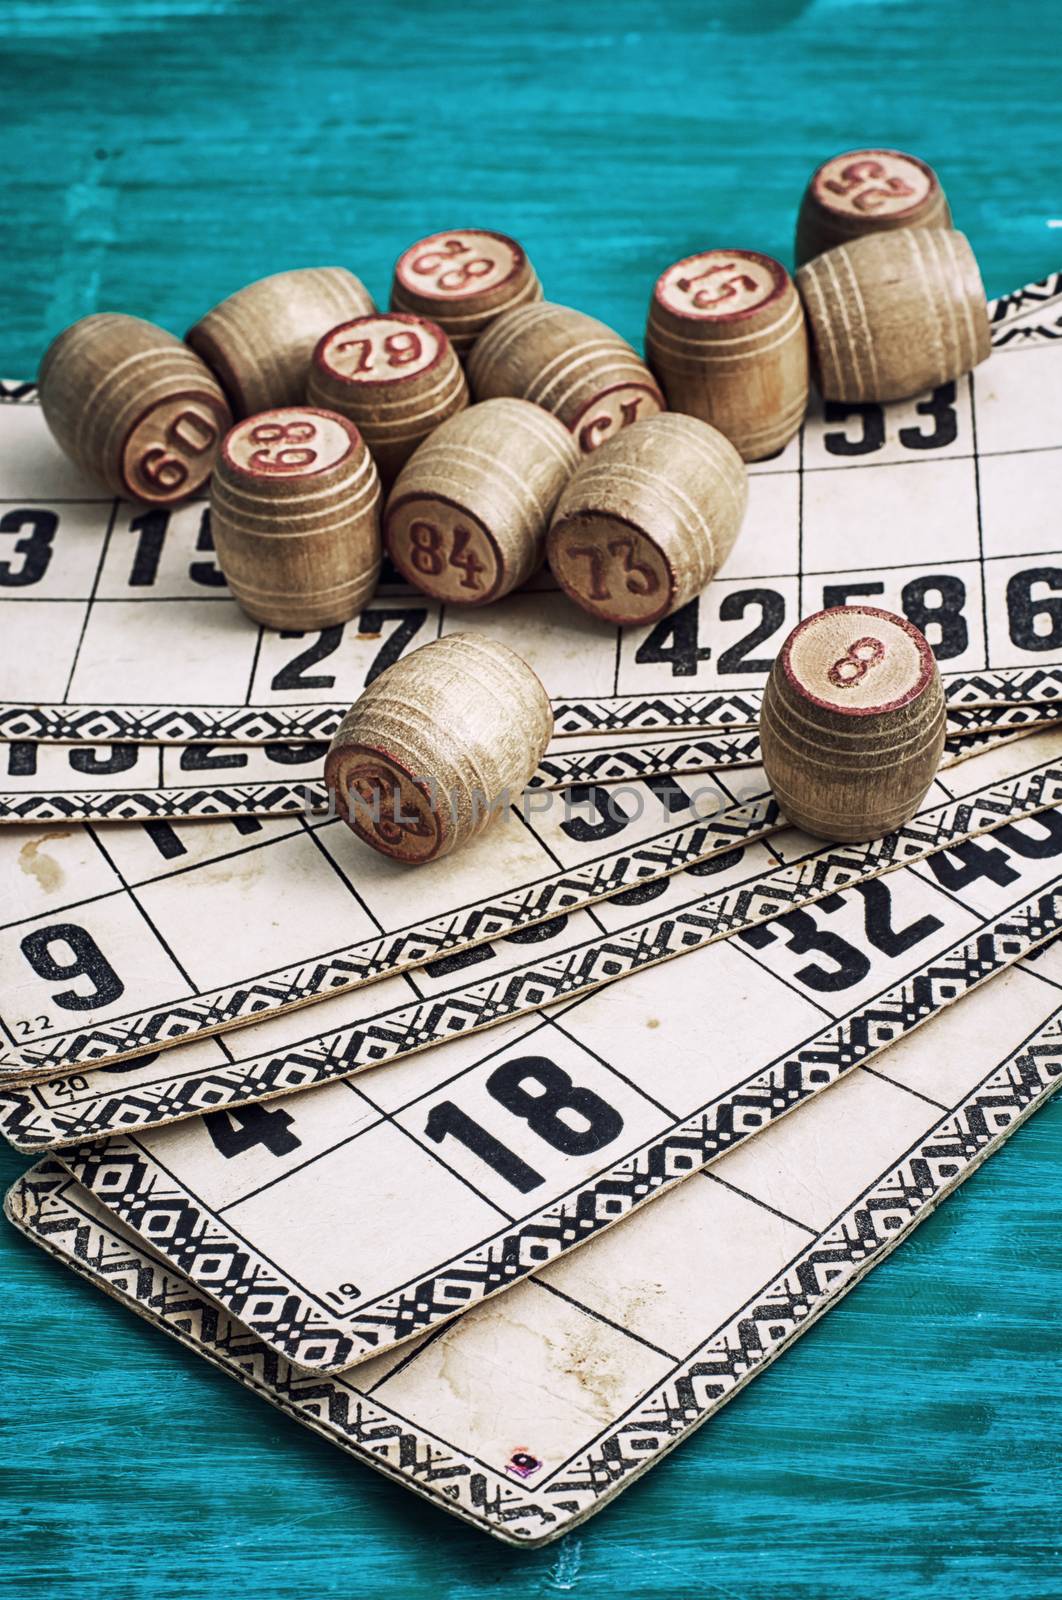 traditional legacy of the ancient Board game Lotto on wooden background